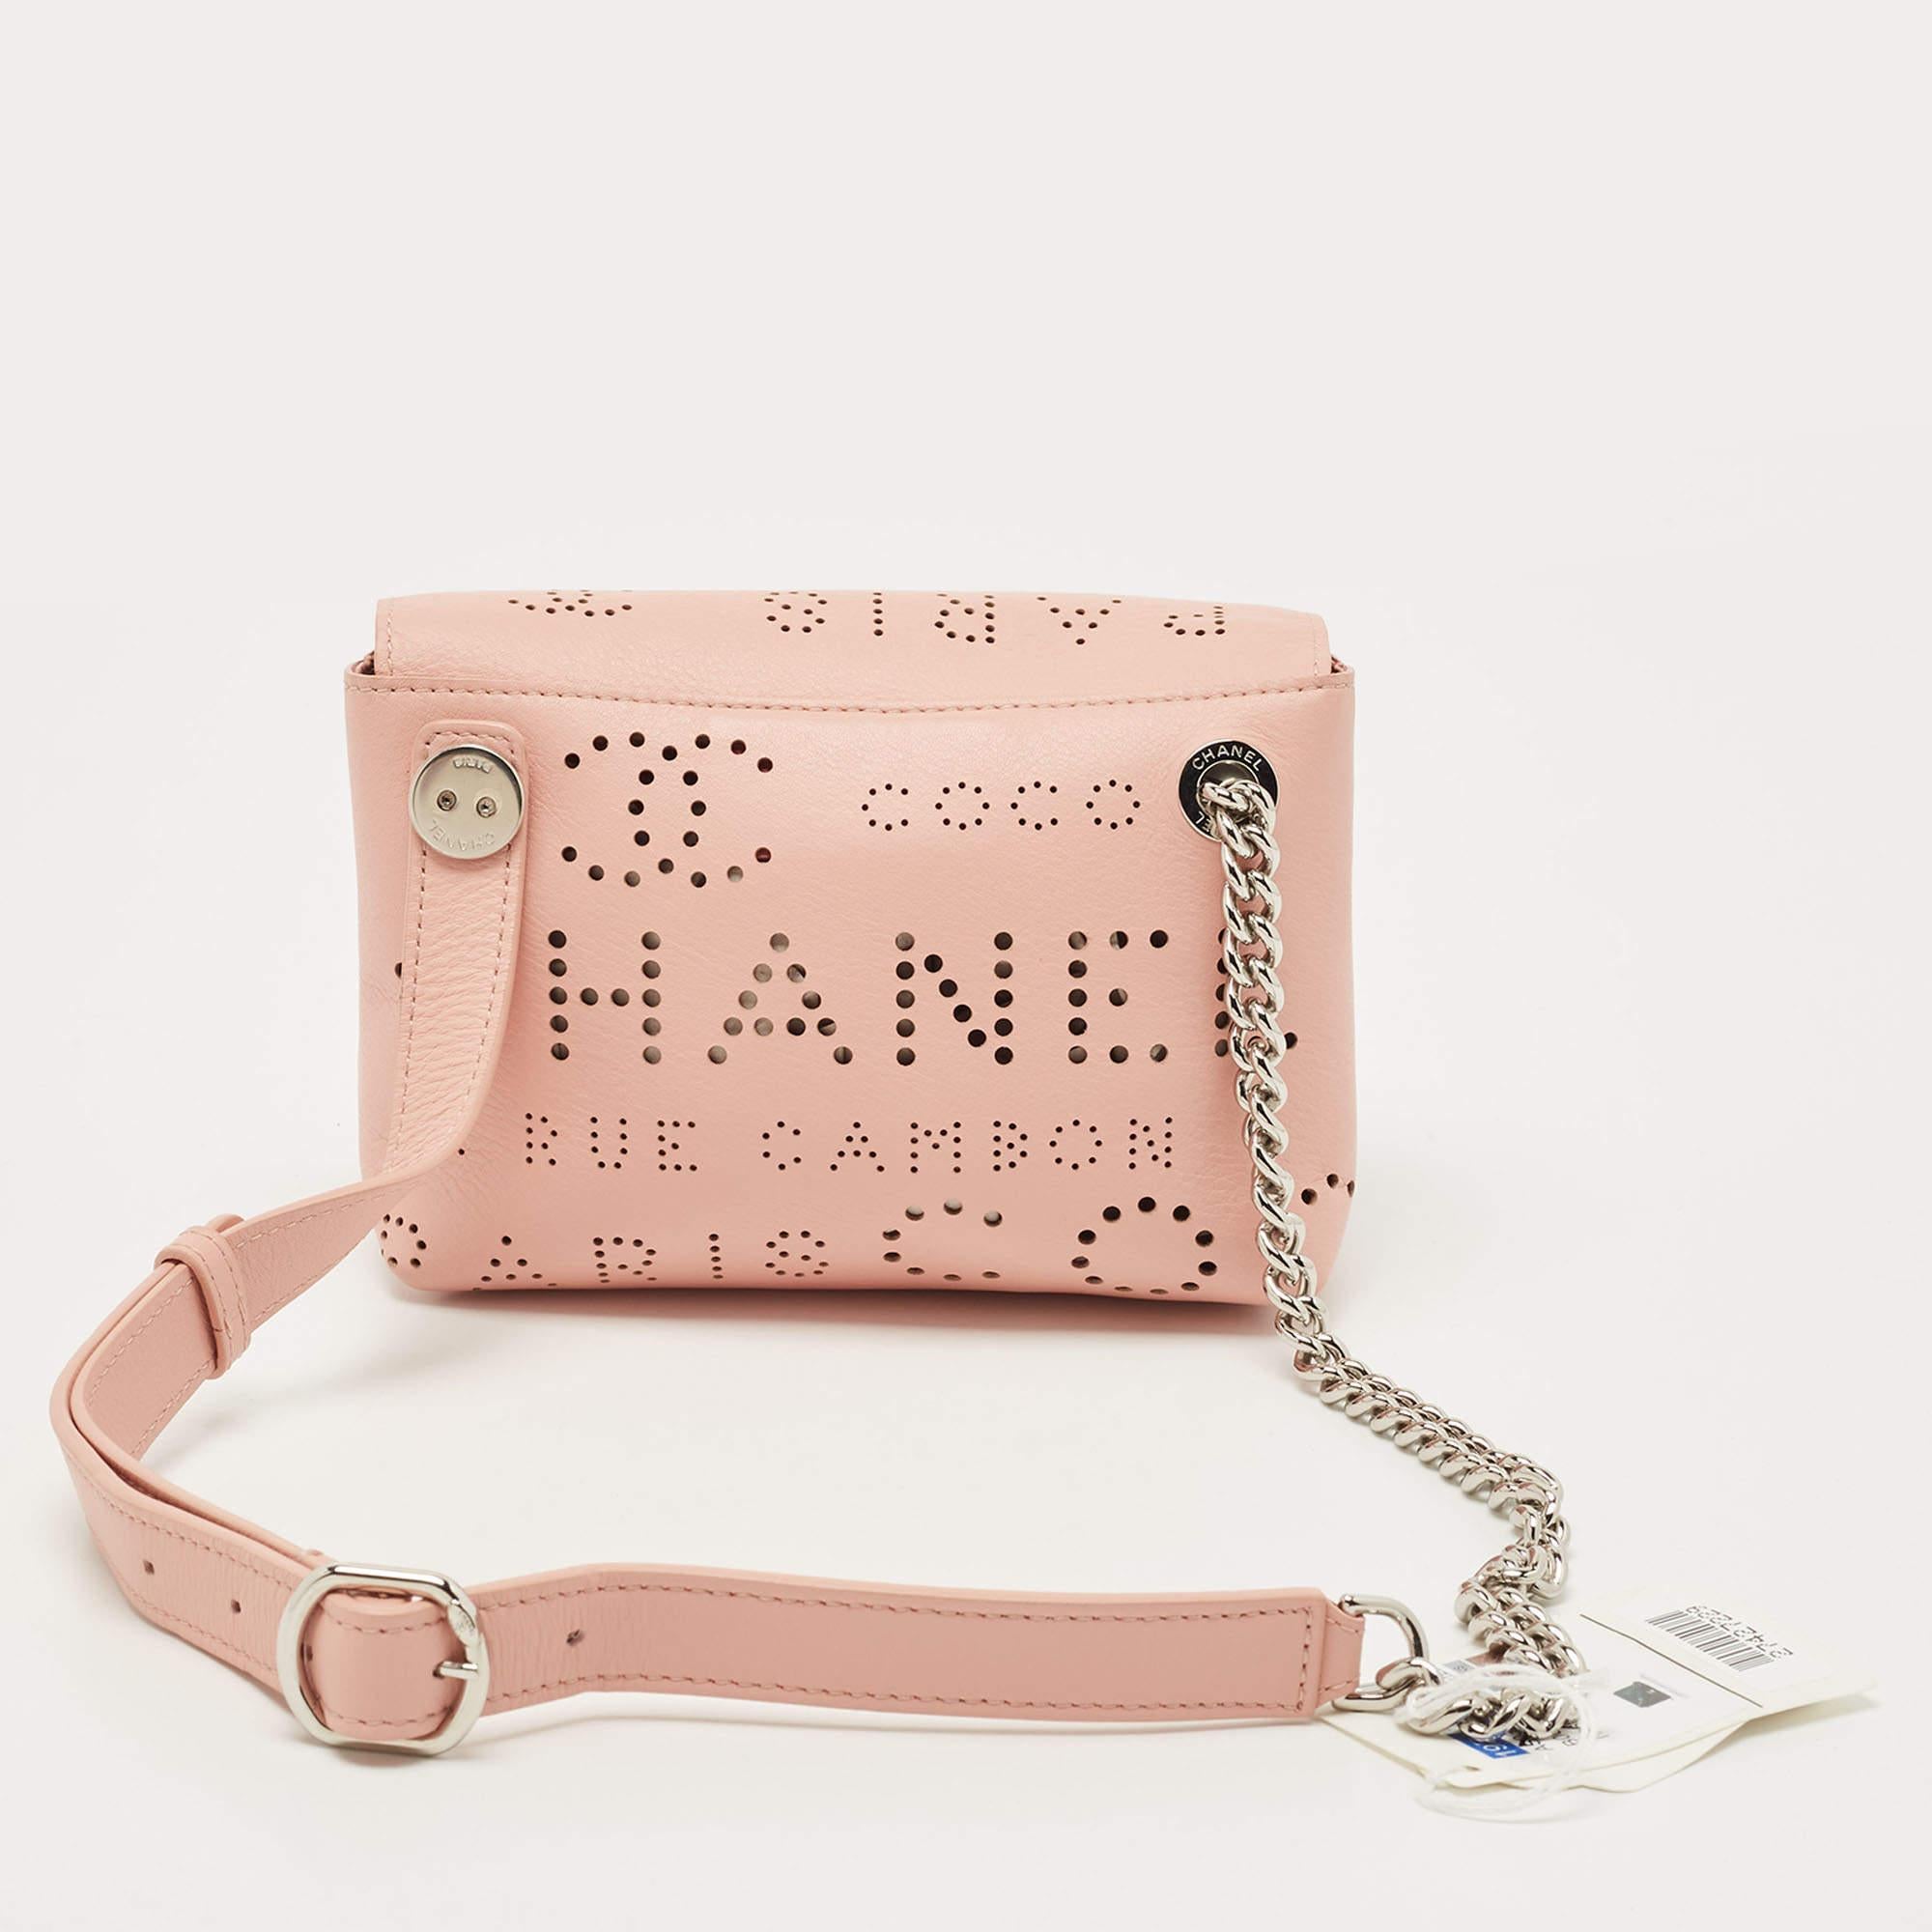 Chanel Pink Leather Eyelet Waist Bag For Sale 2